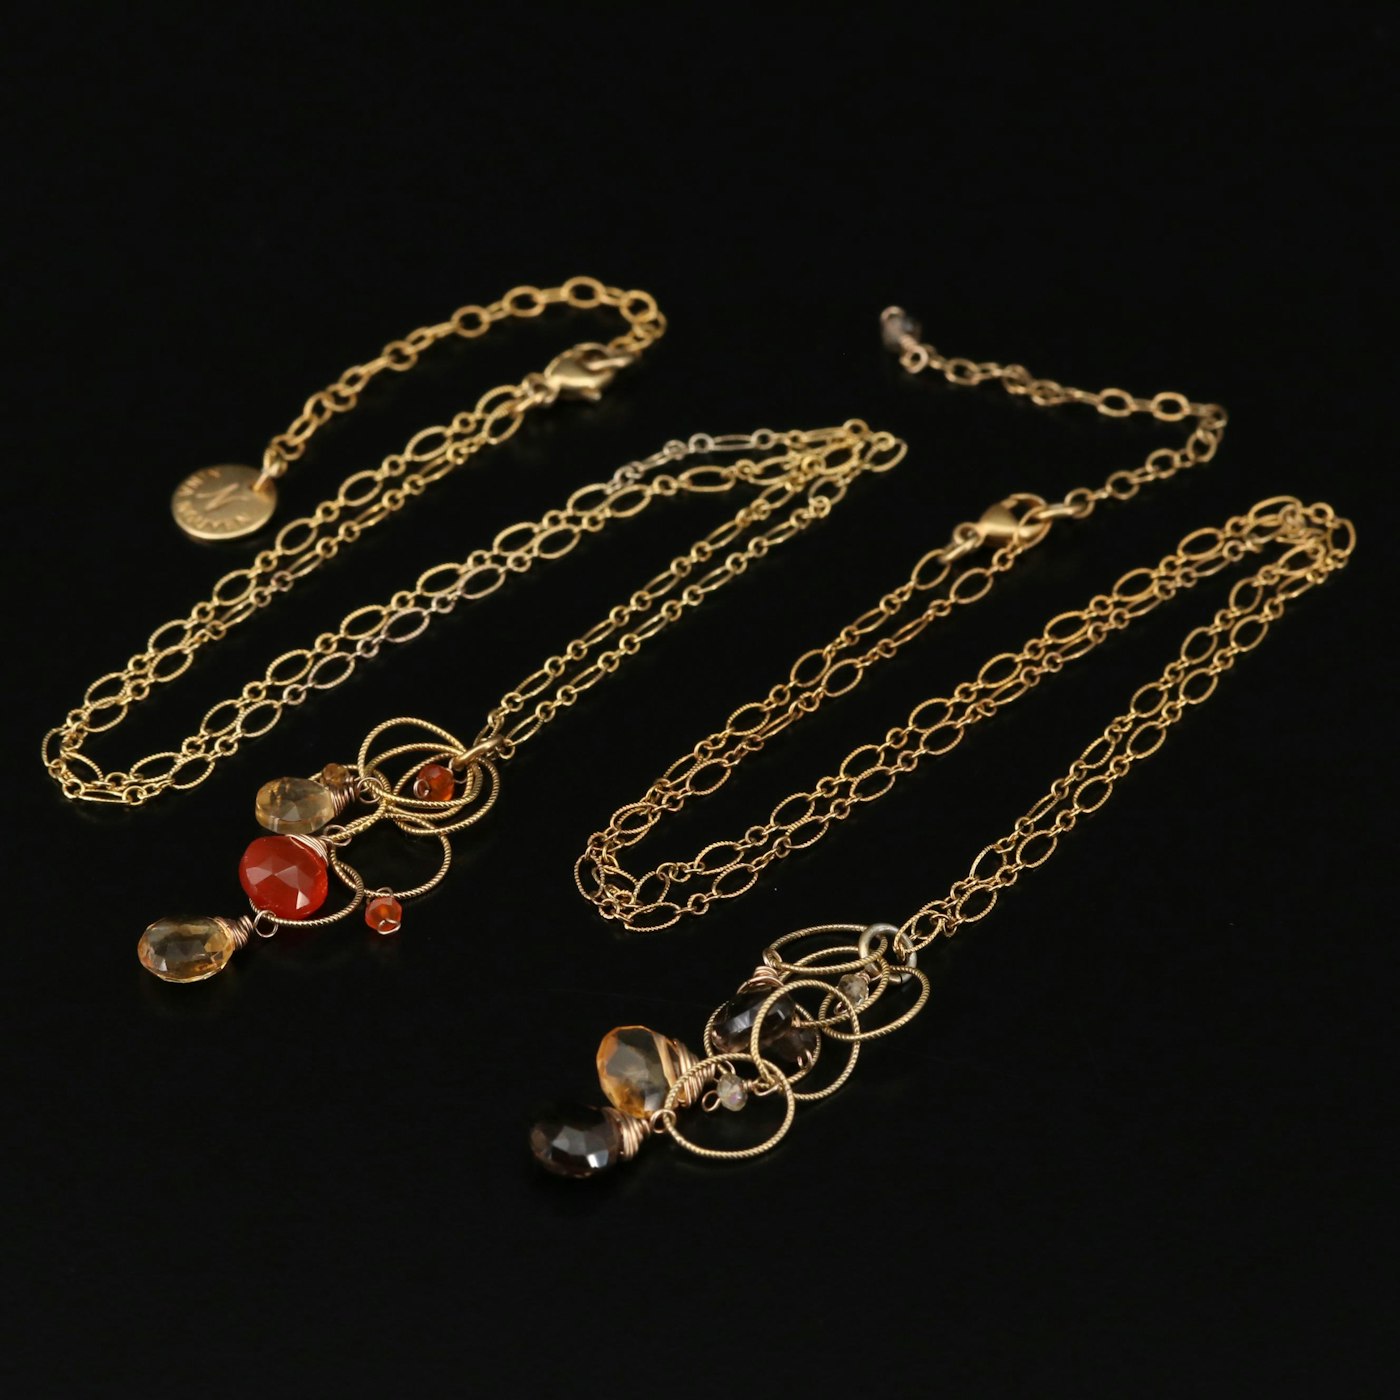 Nina Nguyen Sterling Silver Necklaces Featuring Agate and Gemstone